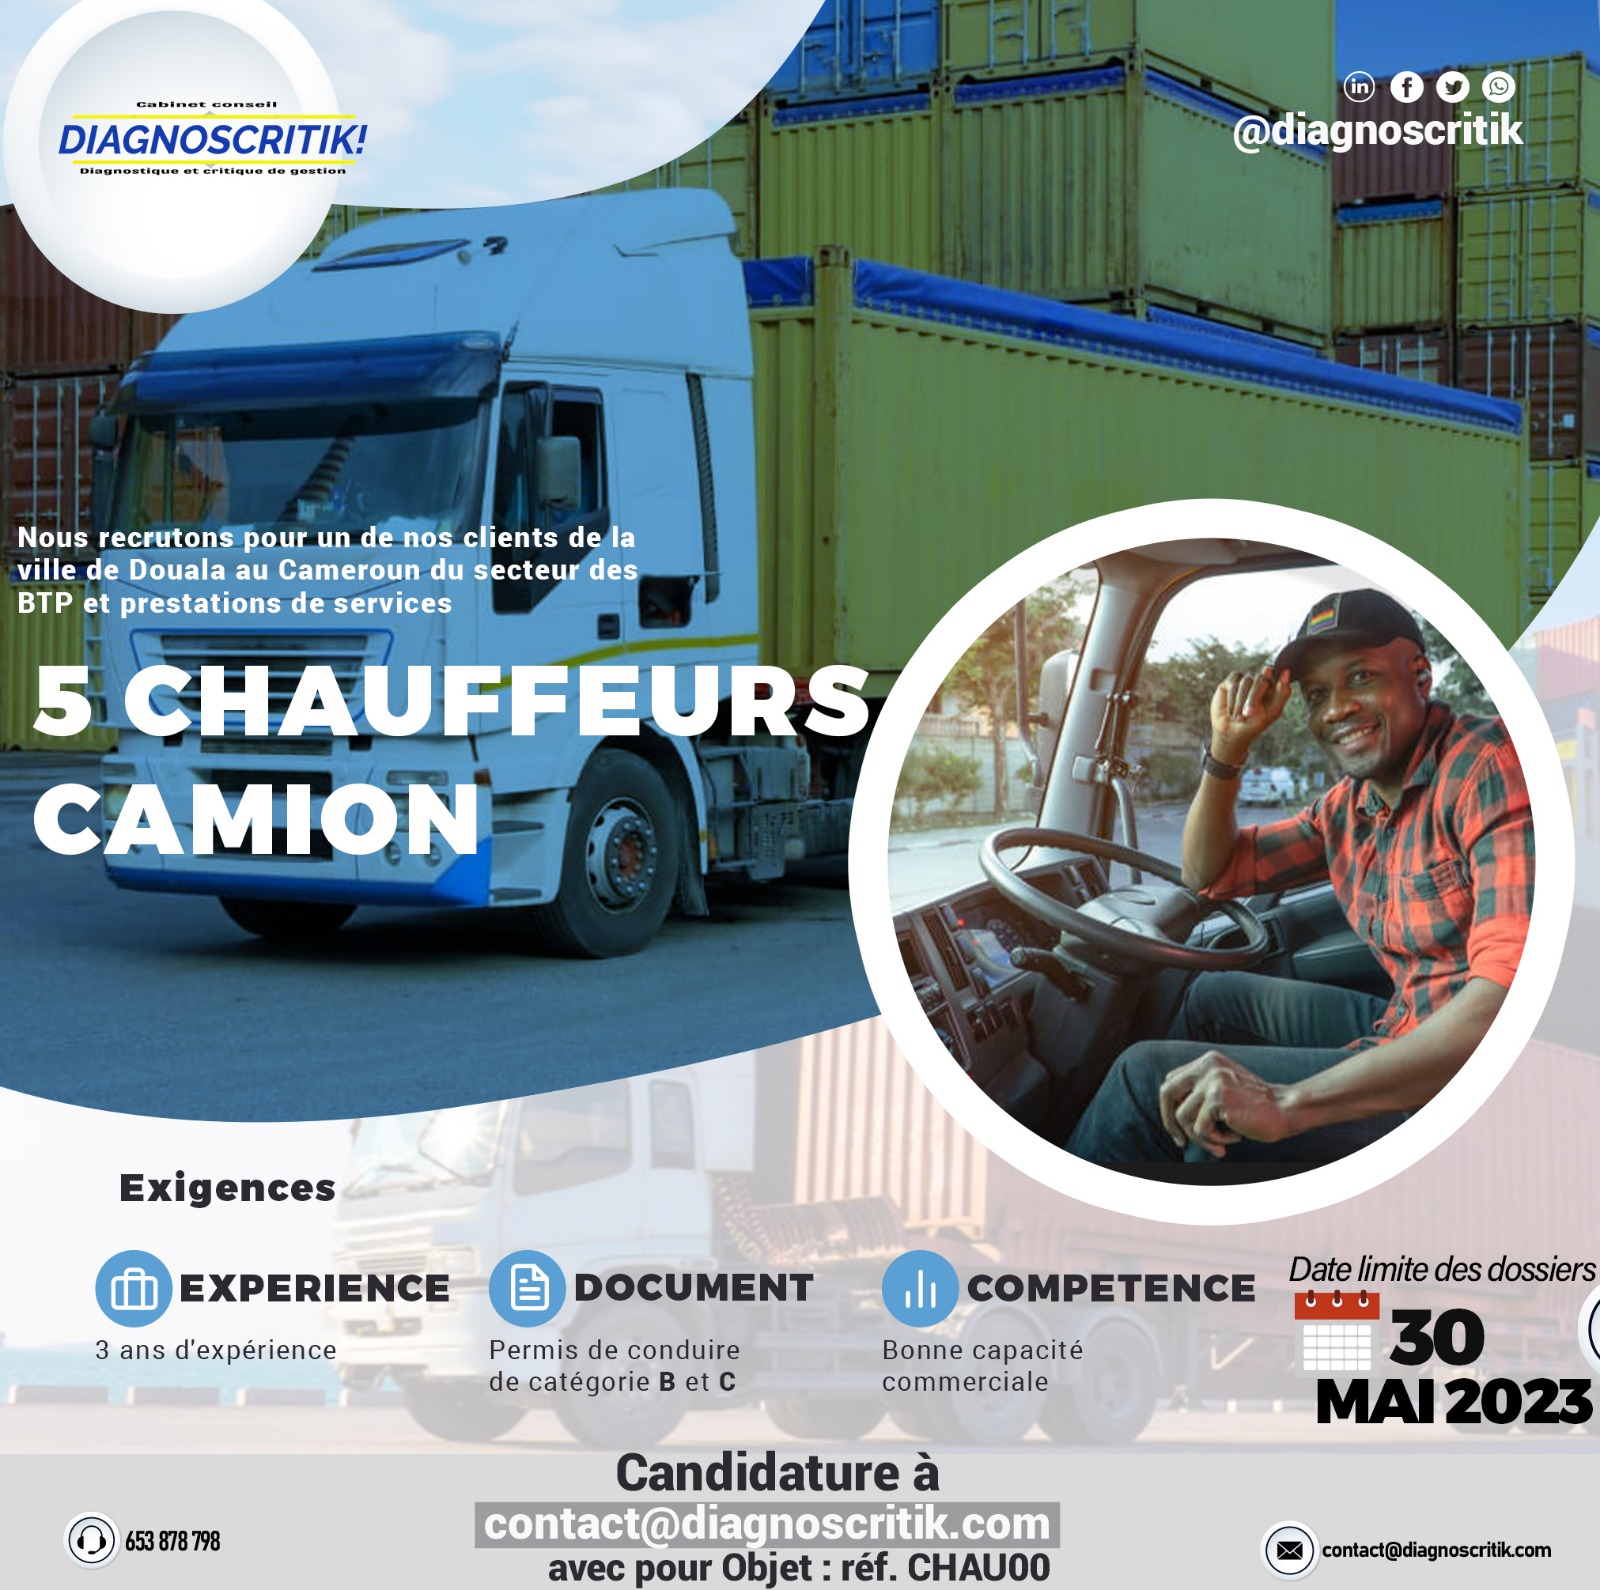 Chauffeurs Camion